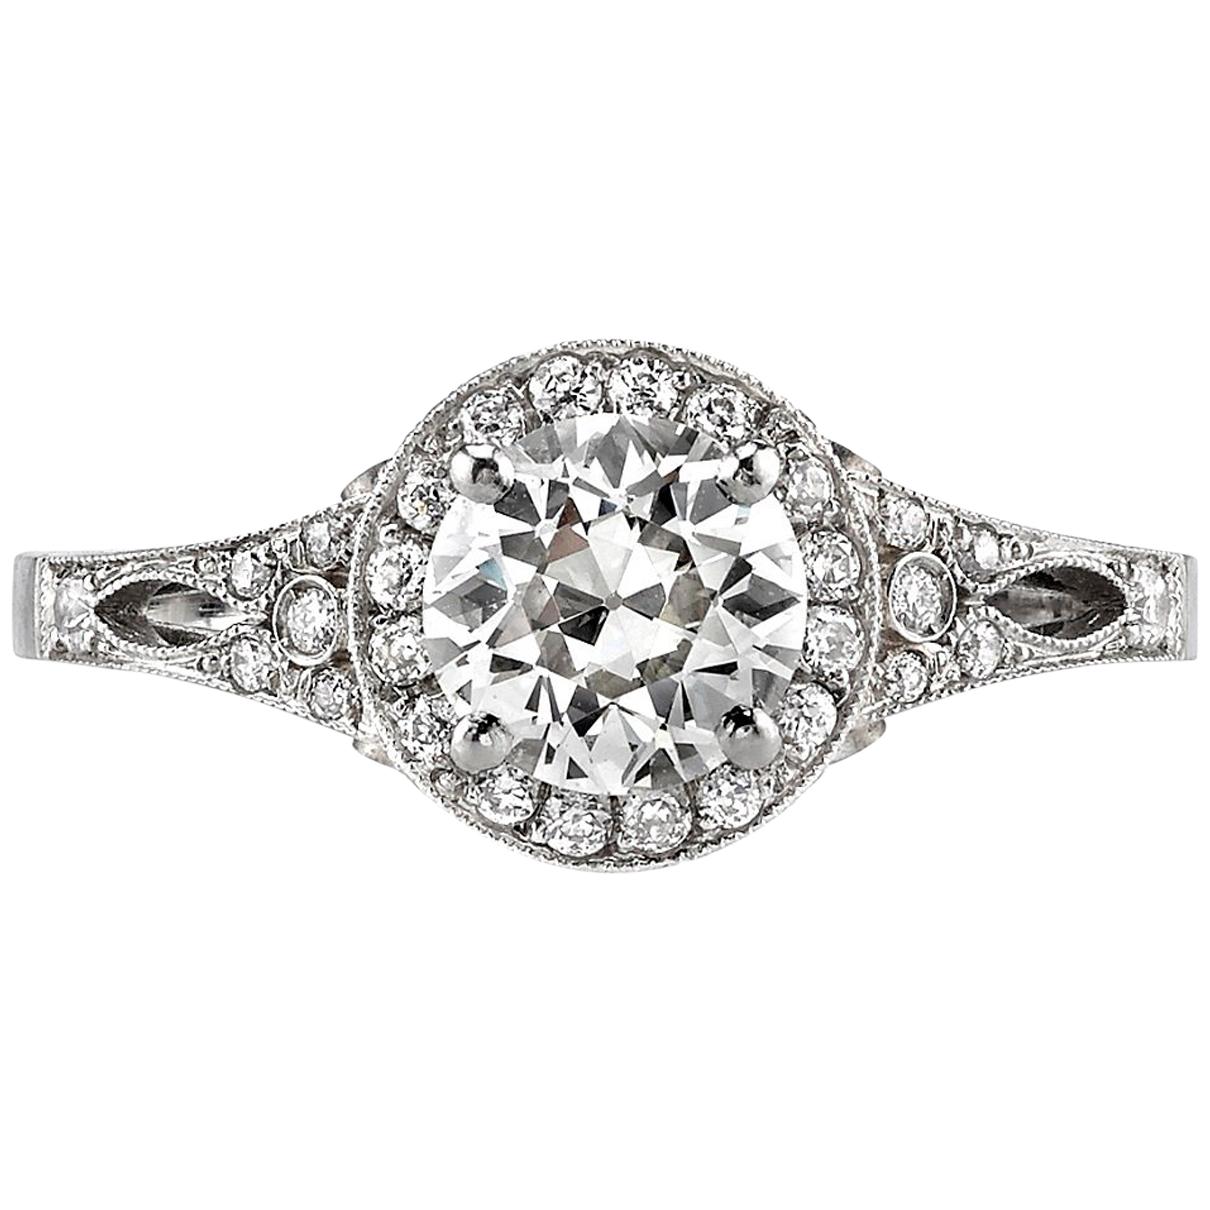 Handcrafted Sasha Old European Cut Diamond Ring in Platinum by Single Stone